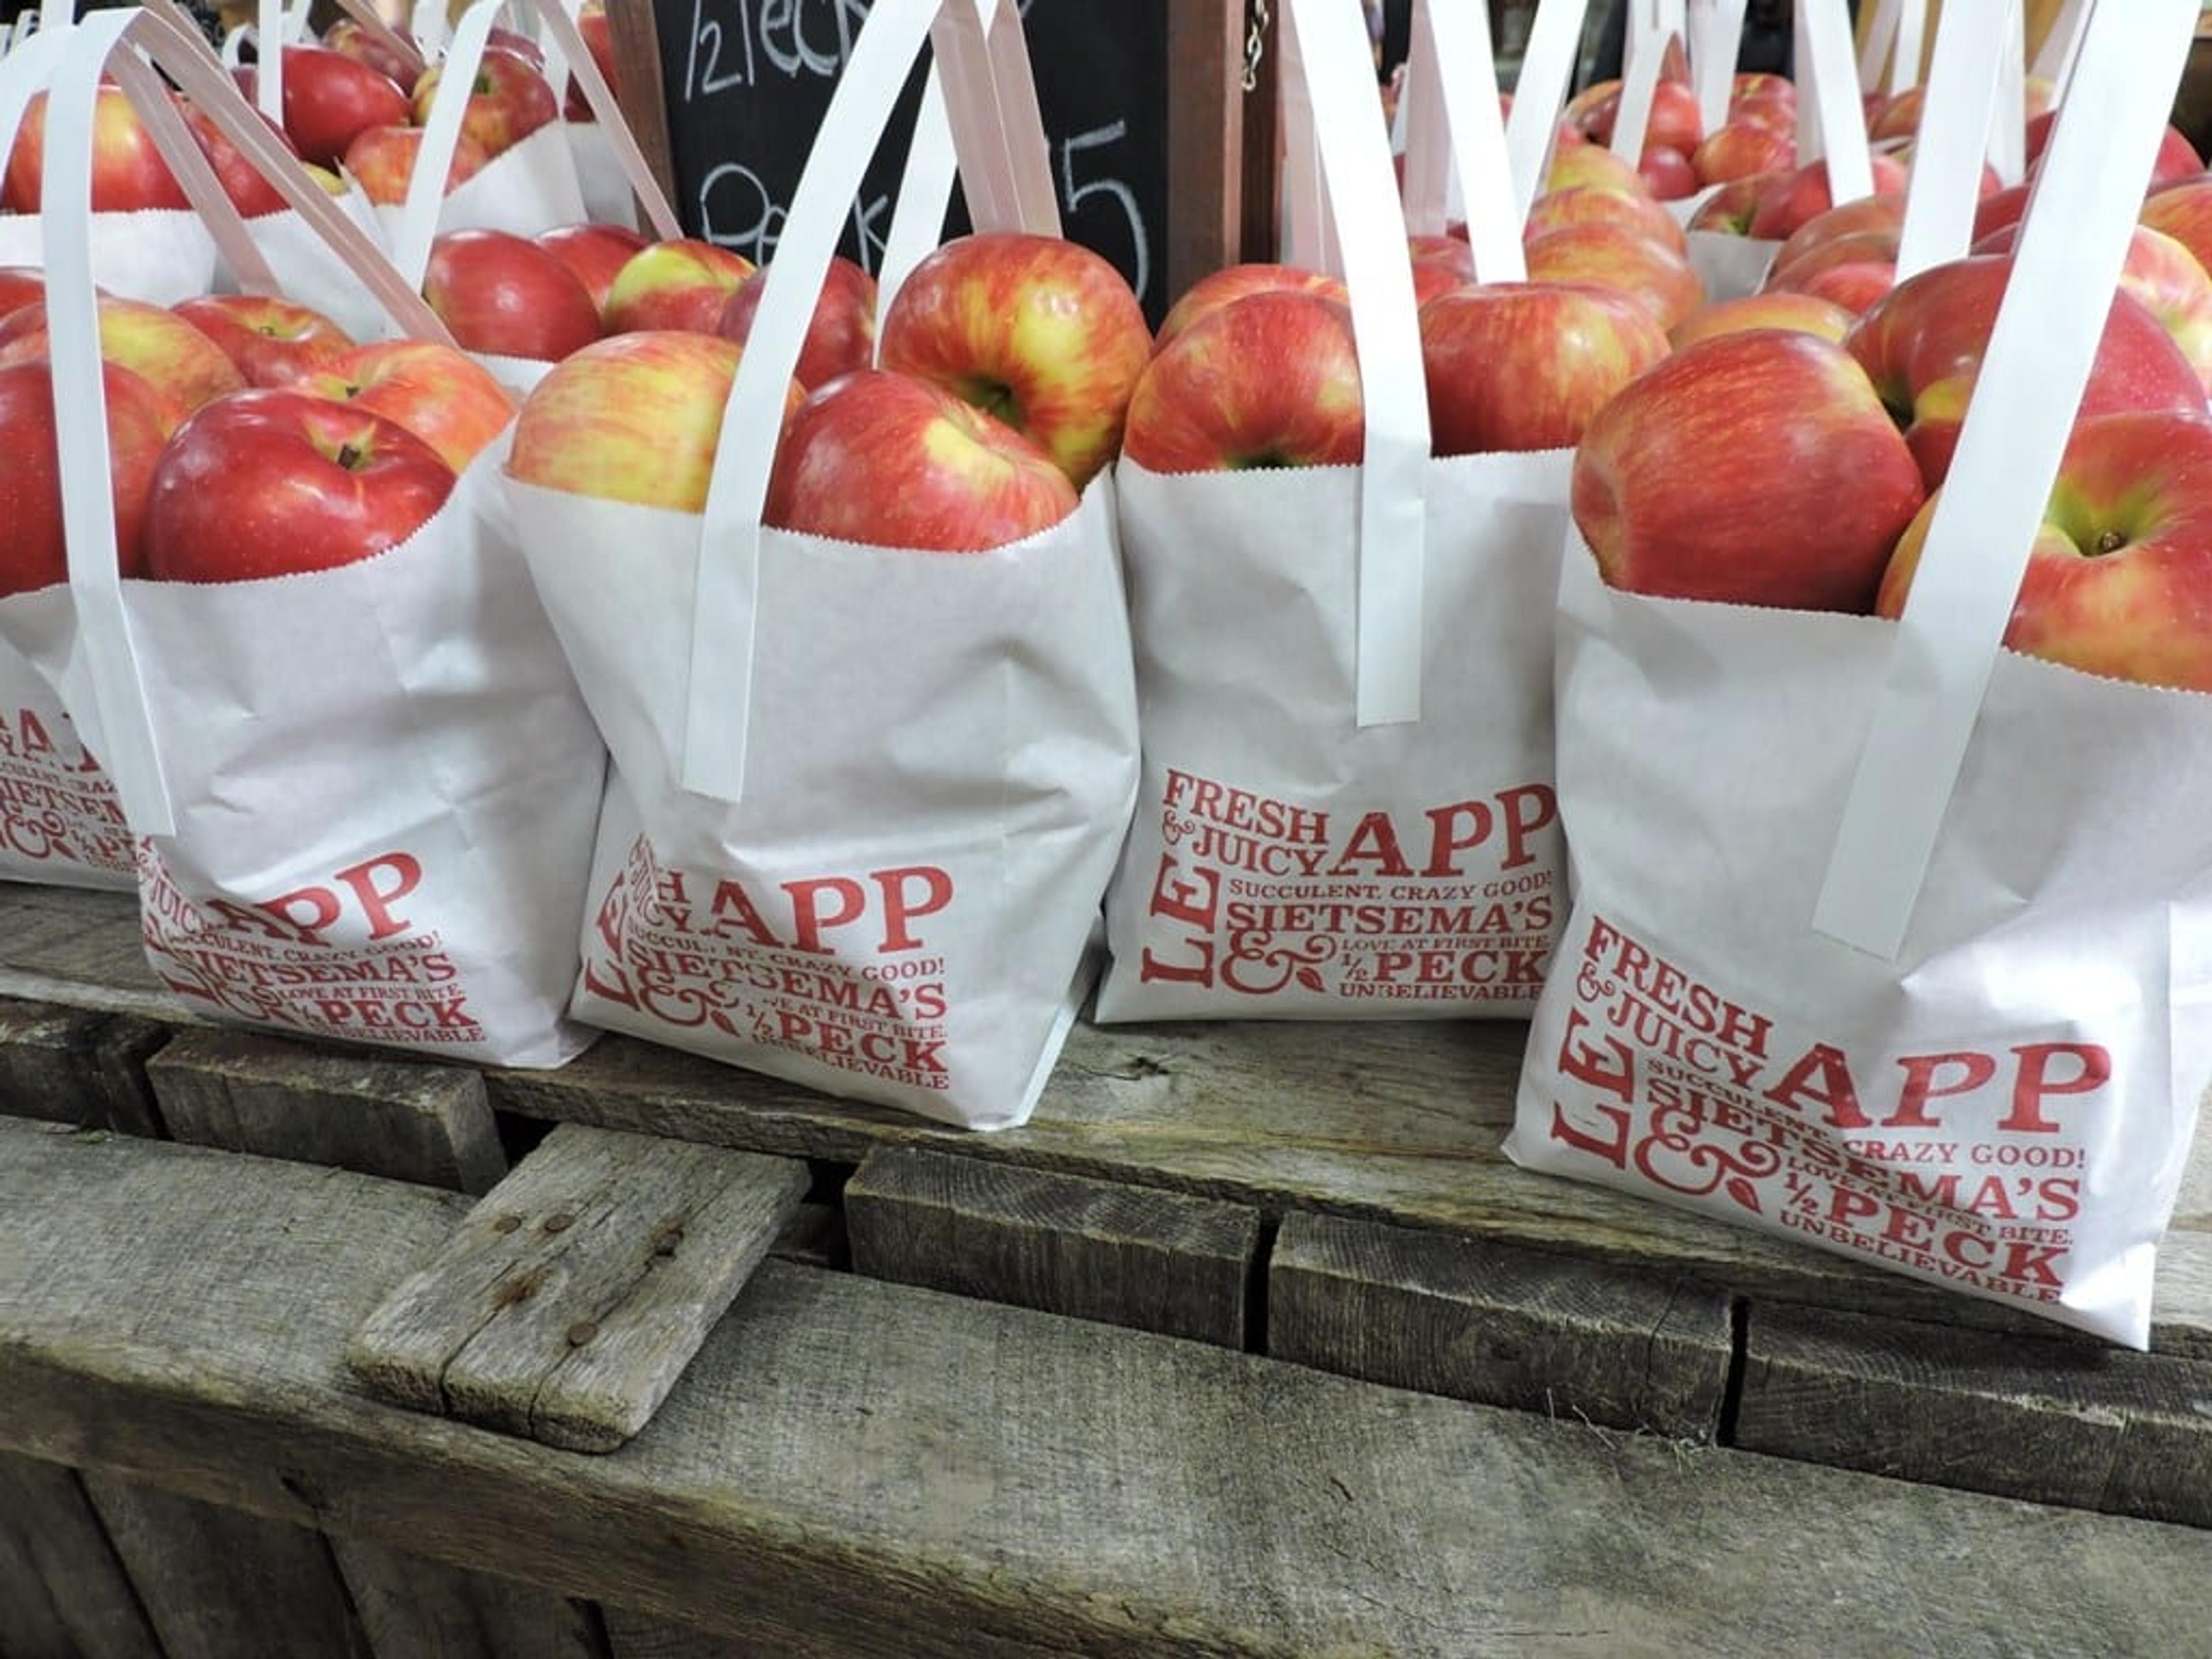 Apples ready to go from Sietsema Orchards.